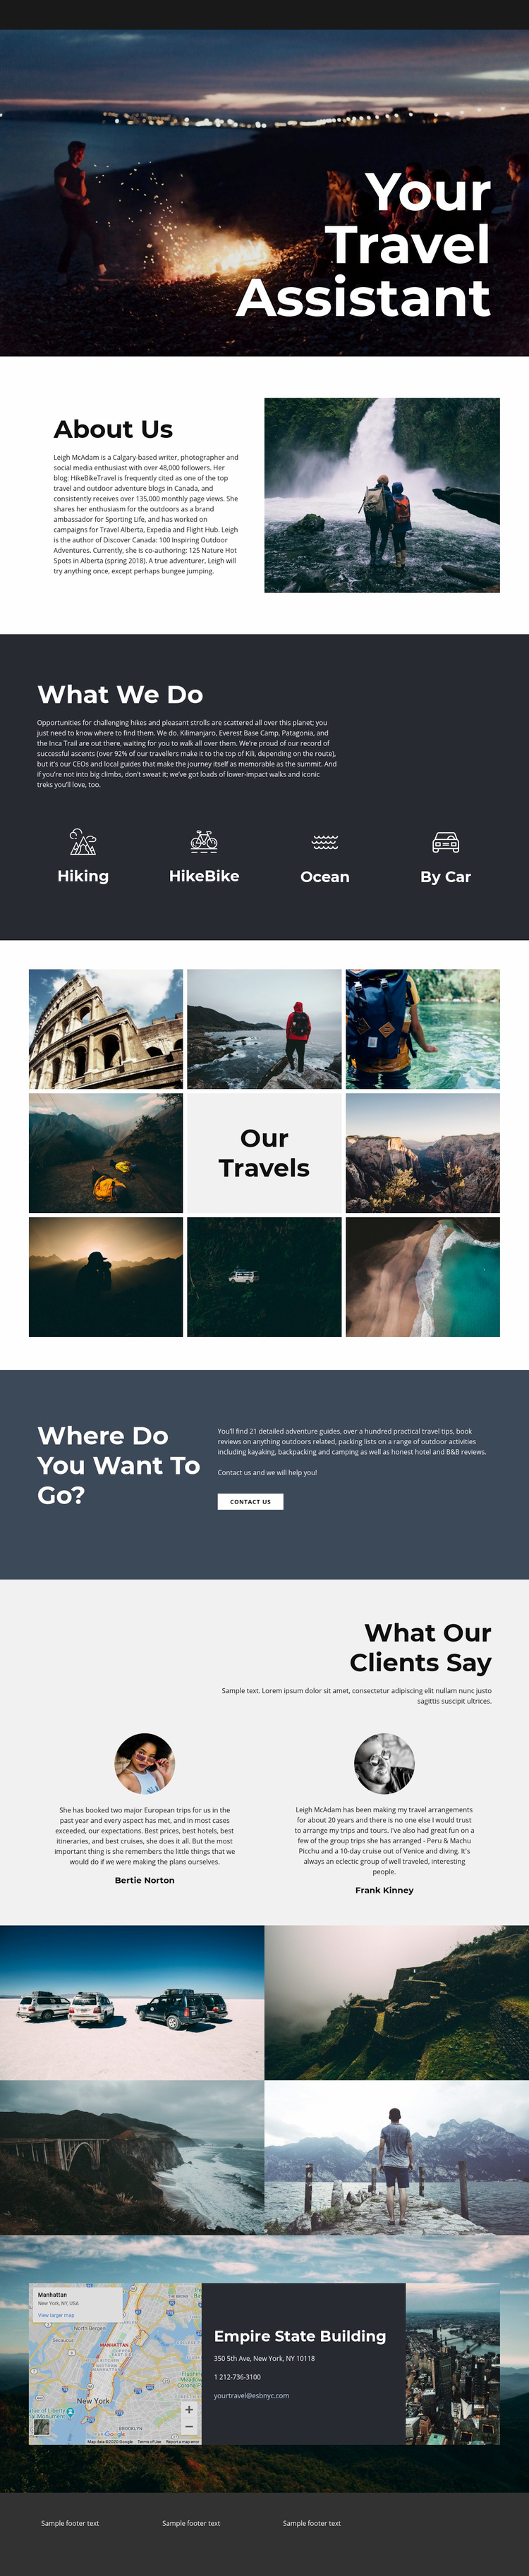 Travel Assistant Wix Template Alternative